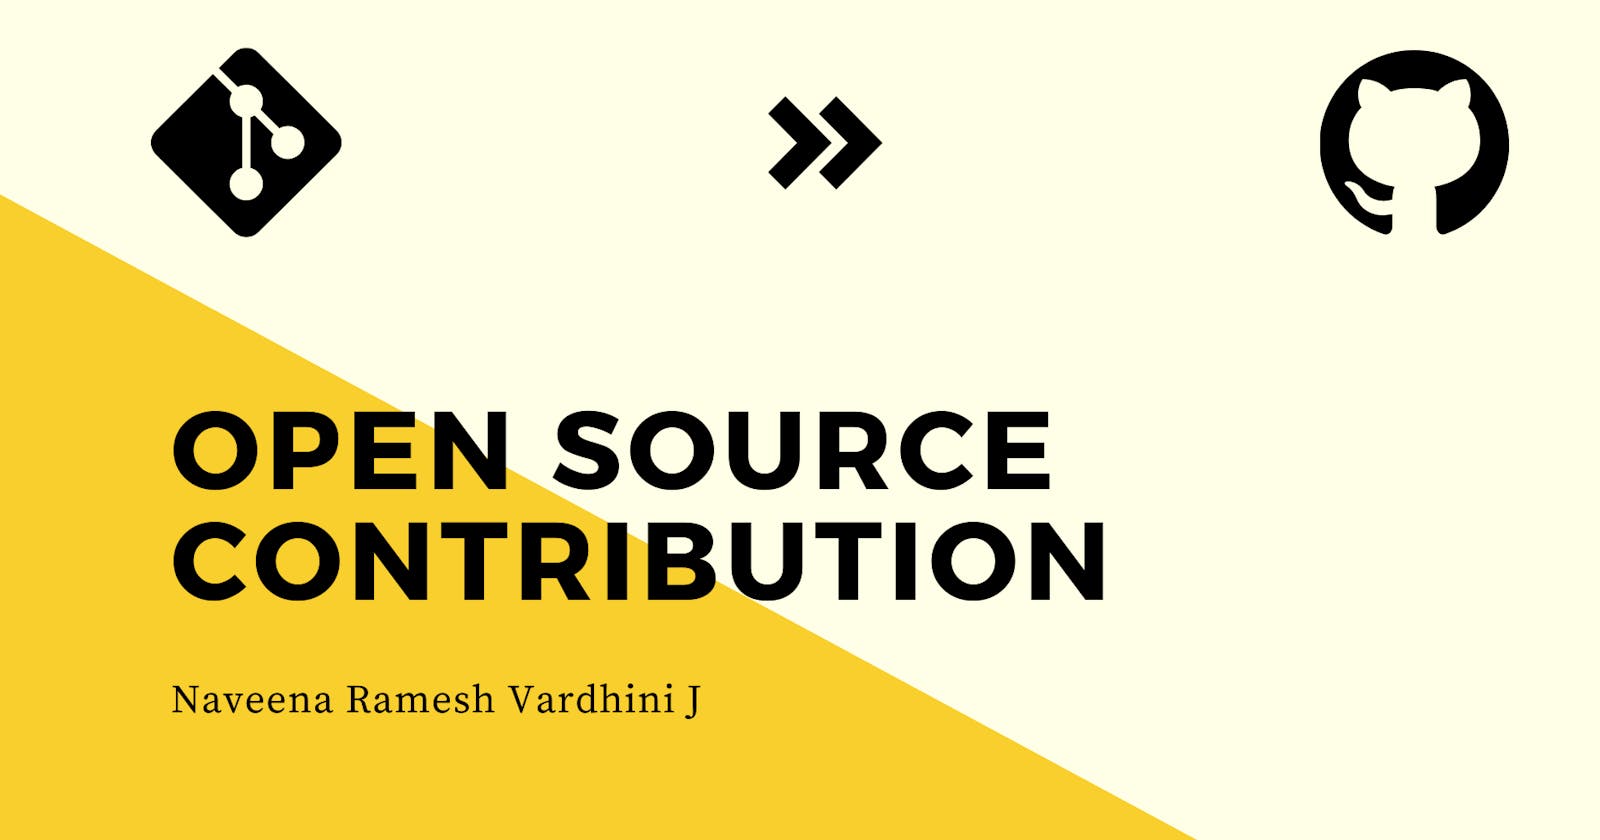 How to Contribute to an Open Source?